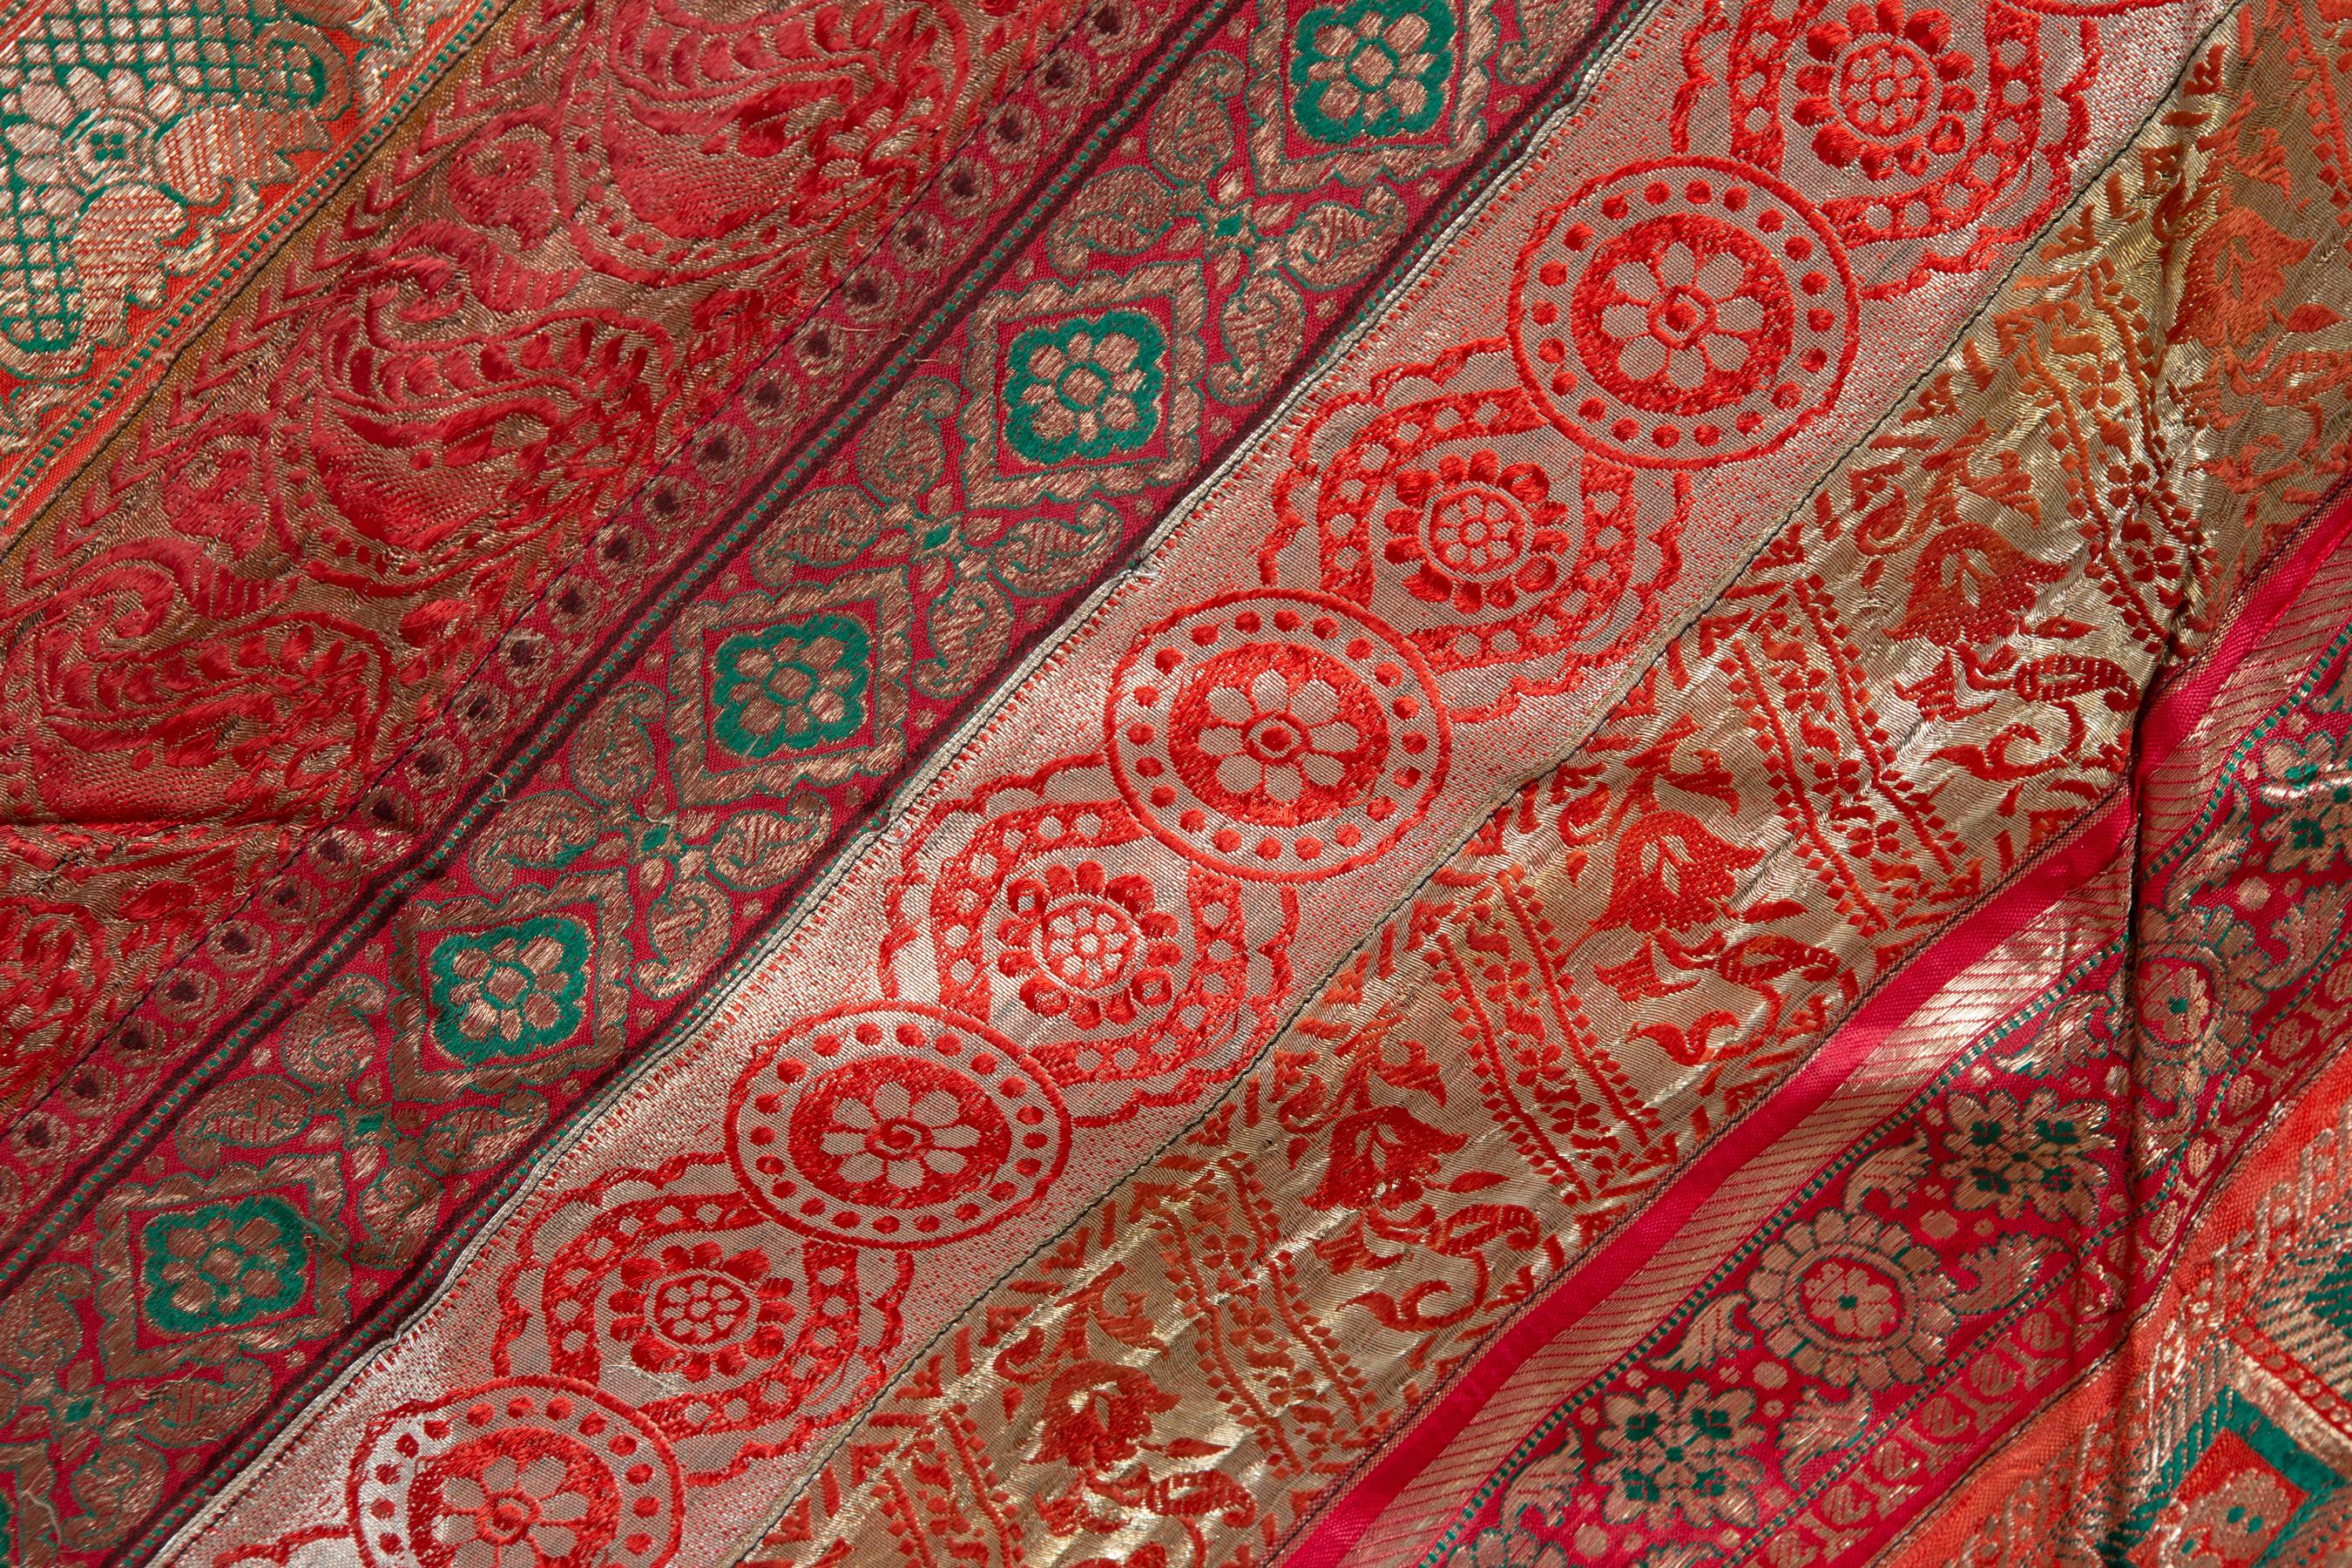 Vintage Indian Silk Embroidered Fabric with Red, Orange, Purple and Golden Tones For Sale 2